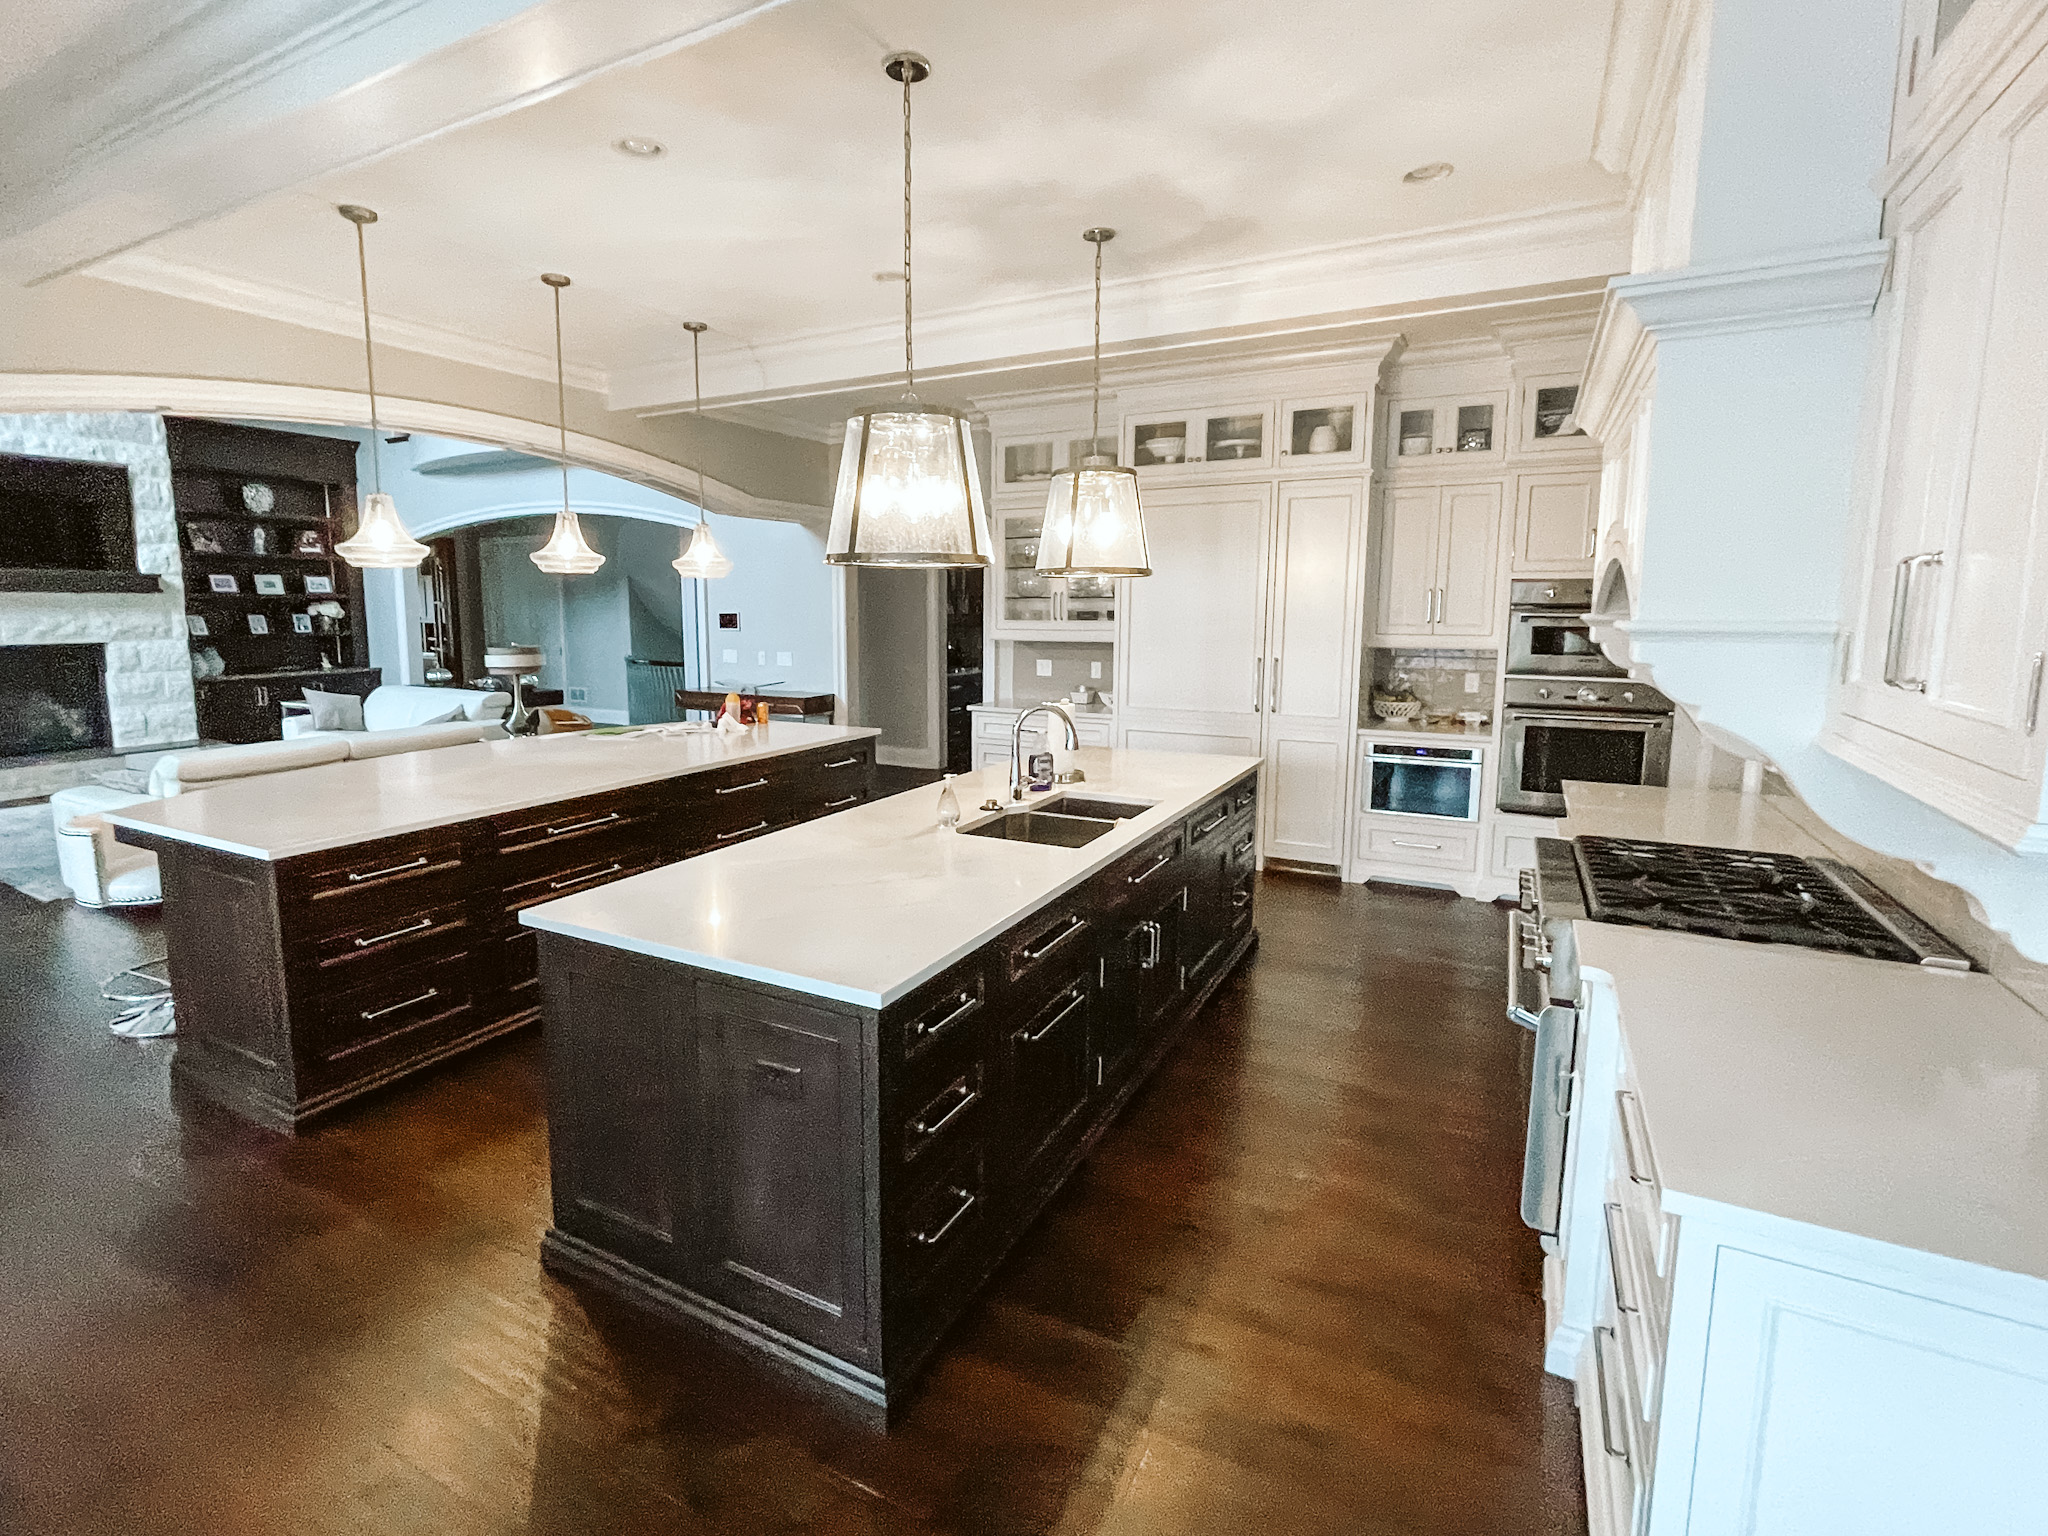 Double wood island kitchen with painted white cabinetry